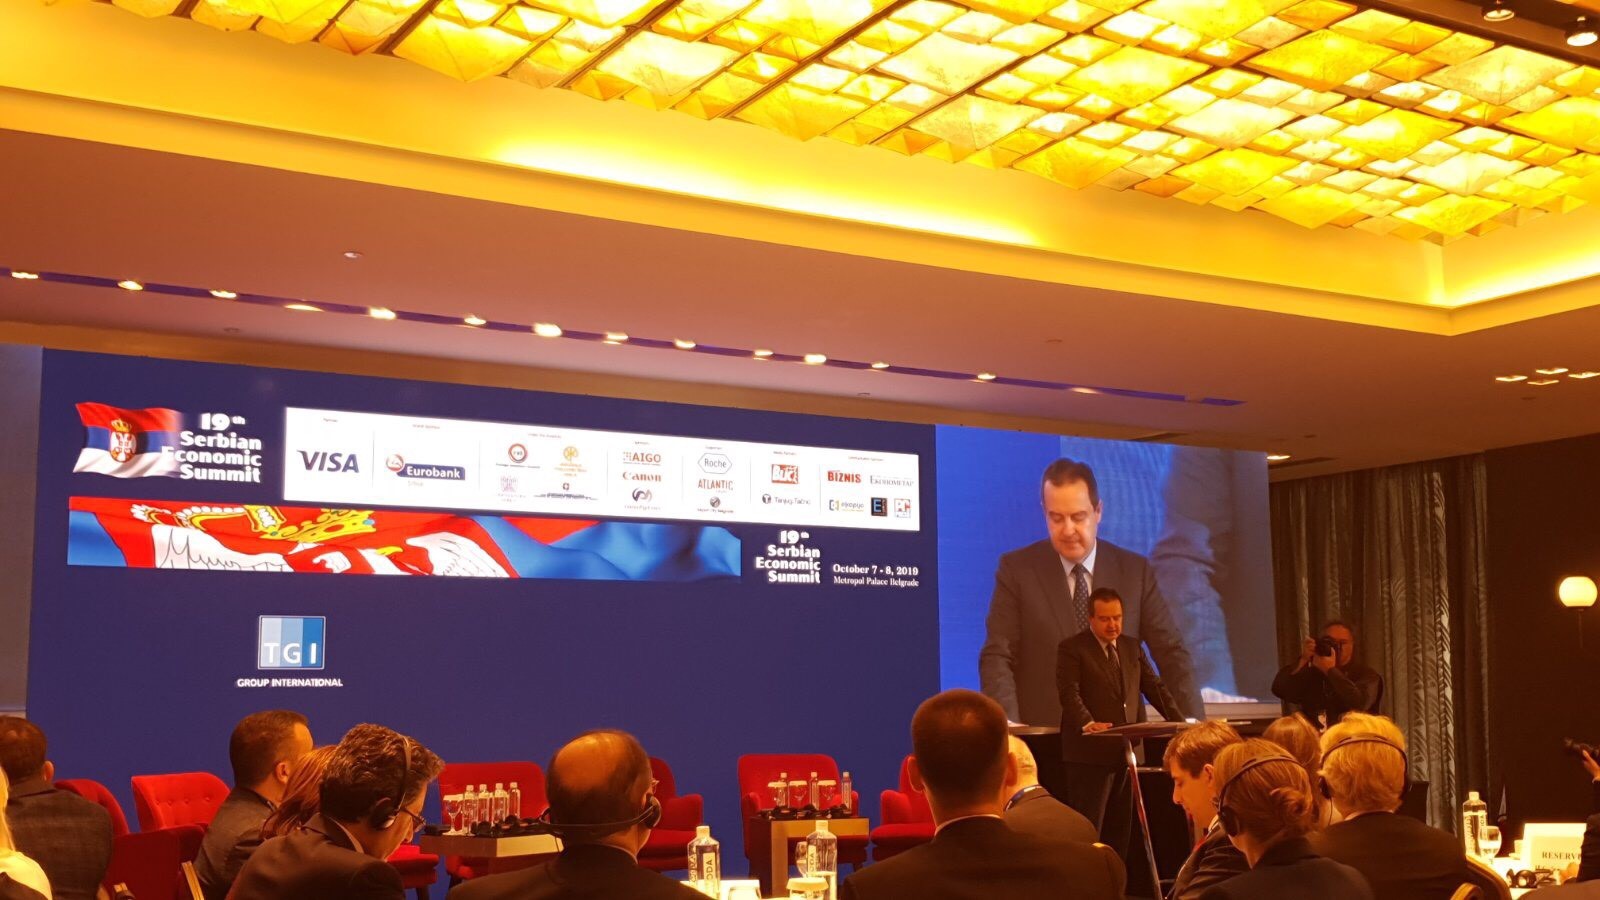 CANSEE attended the 19th Serbian Economic Summit